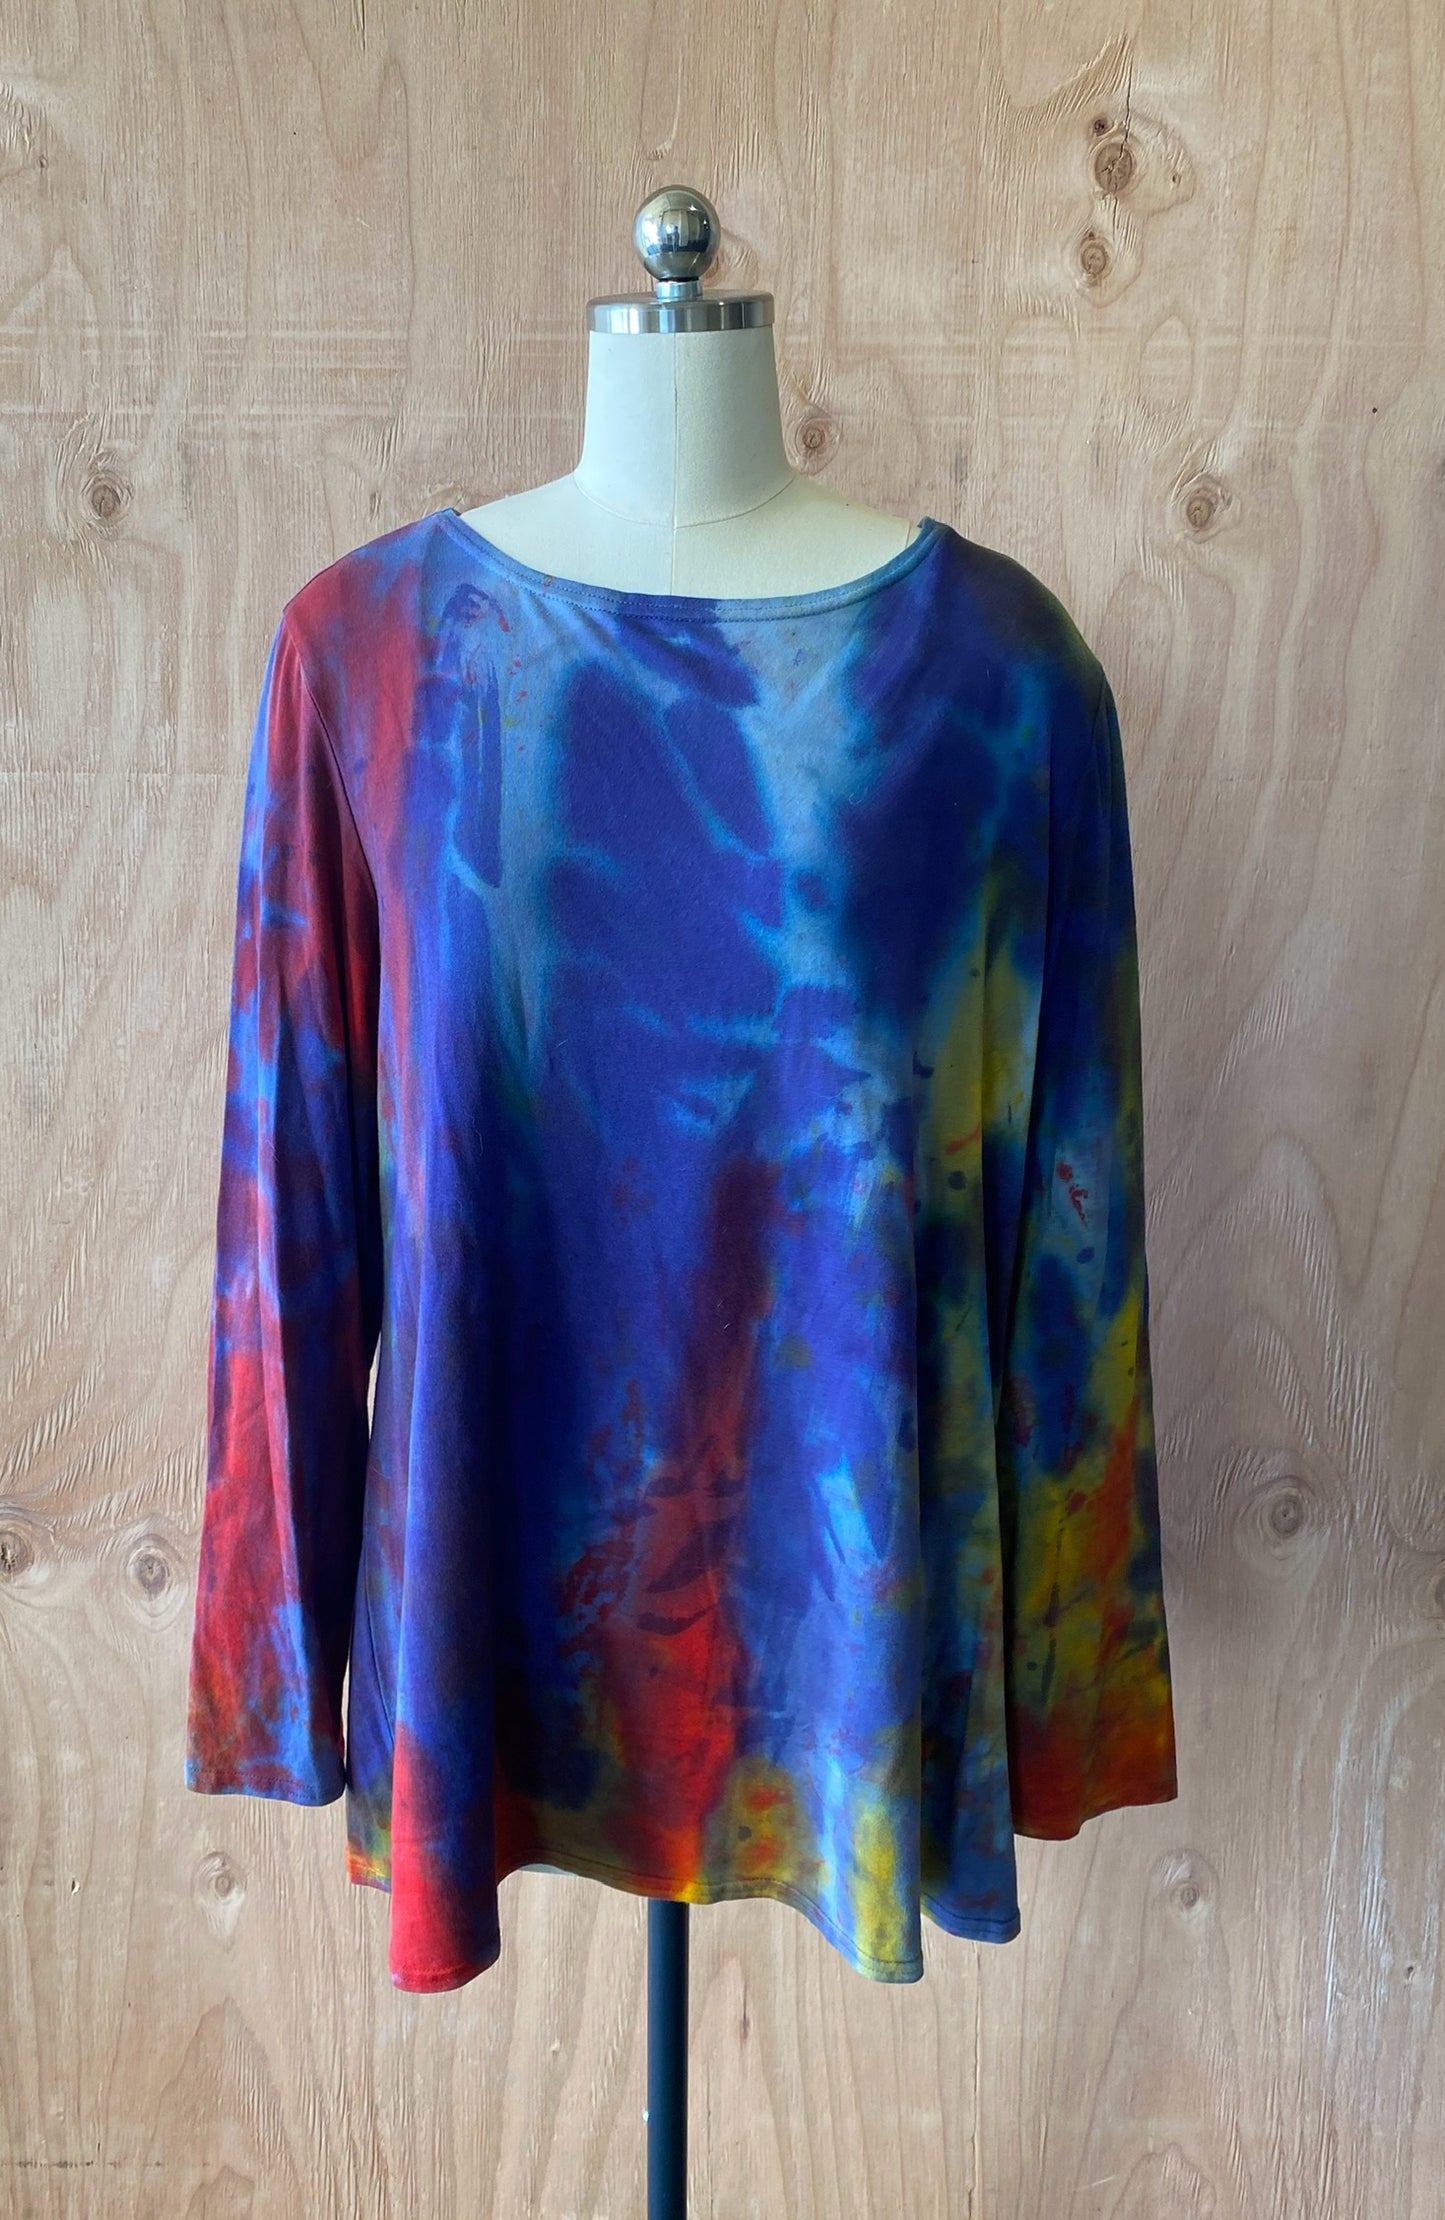 ALLIE Long Sleeve Tunic in Colorful Chaos